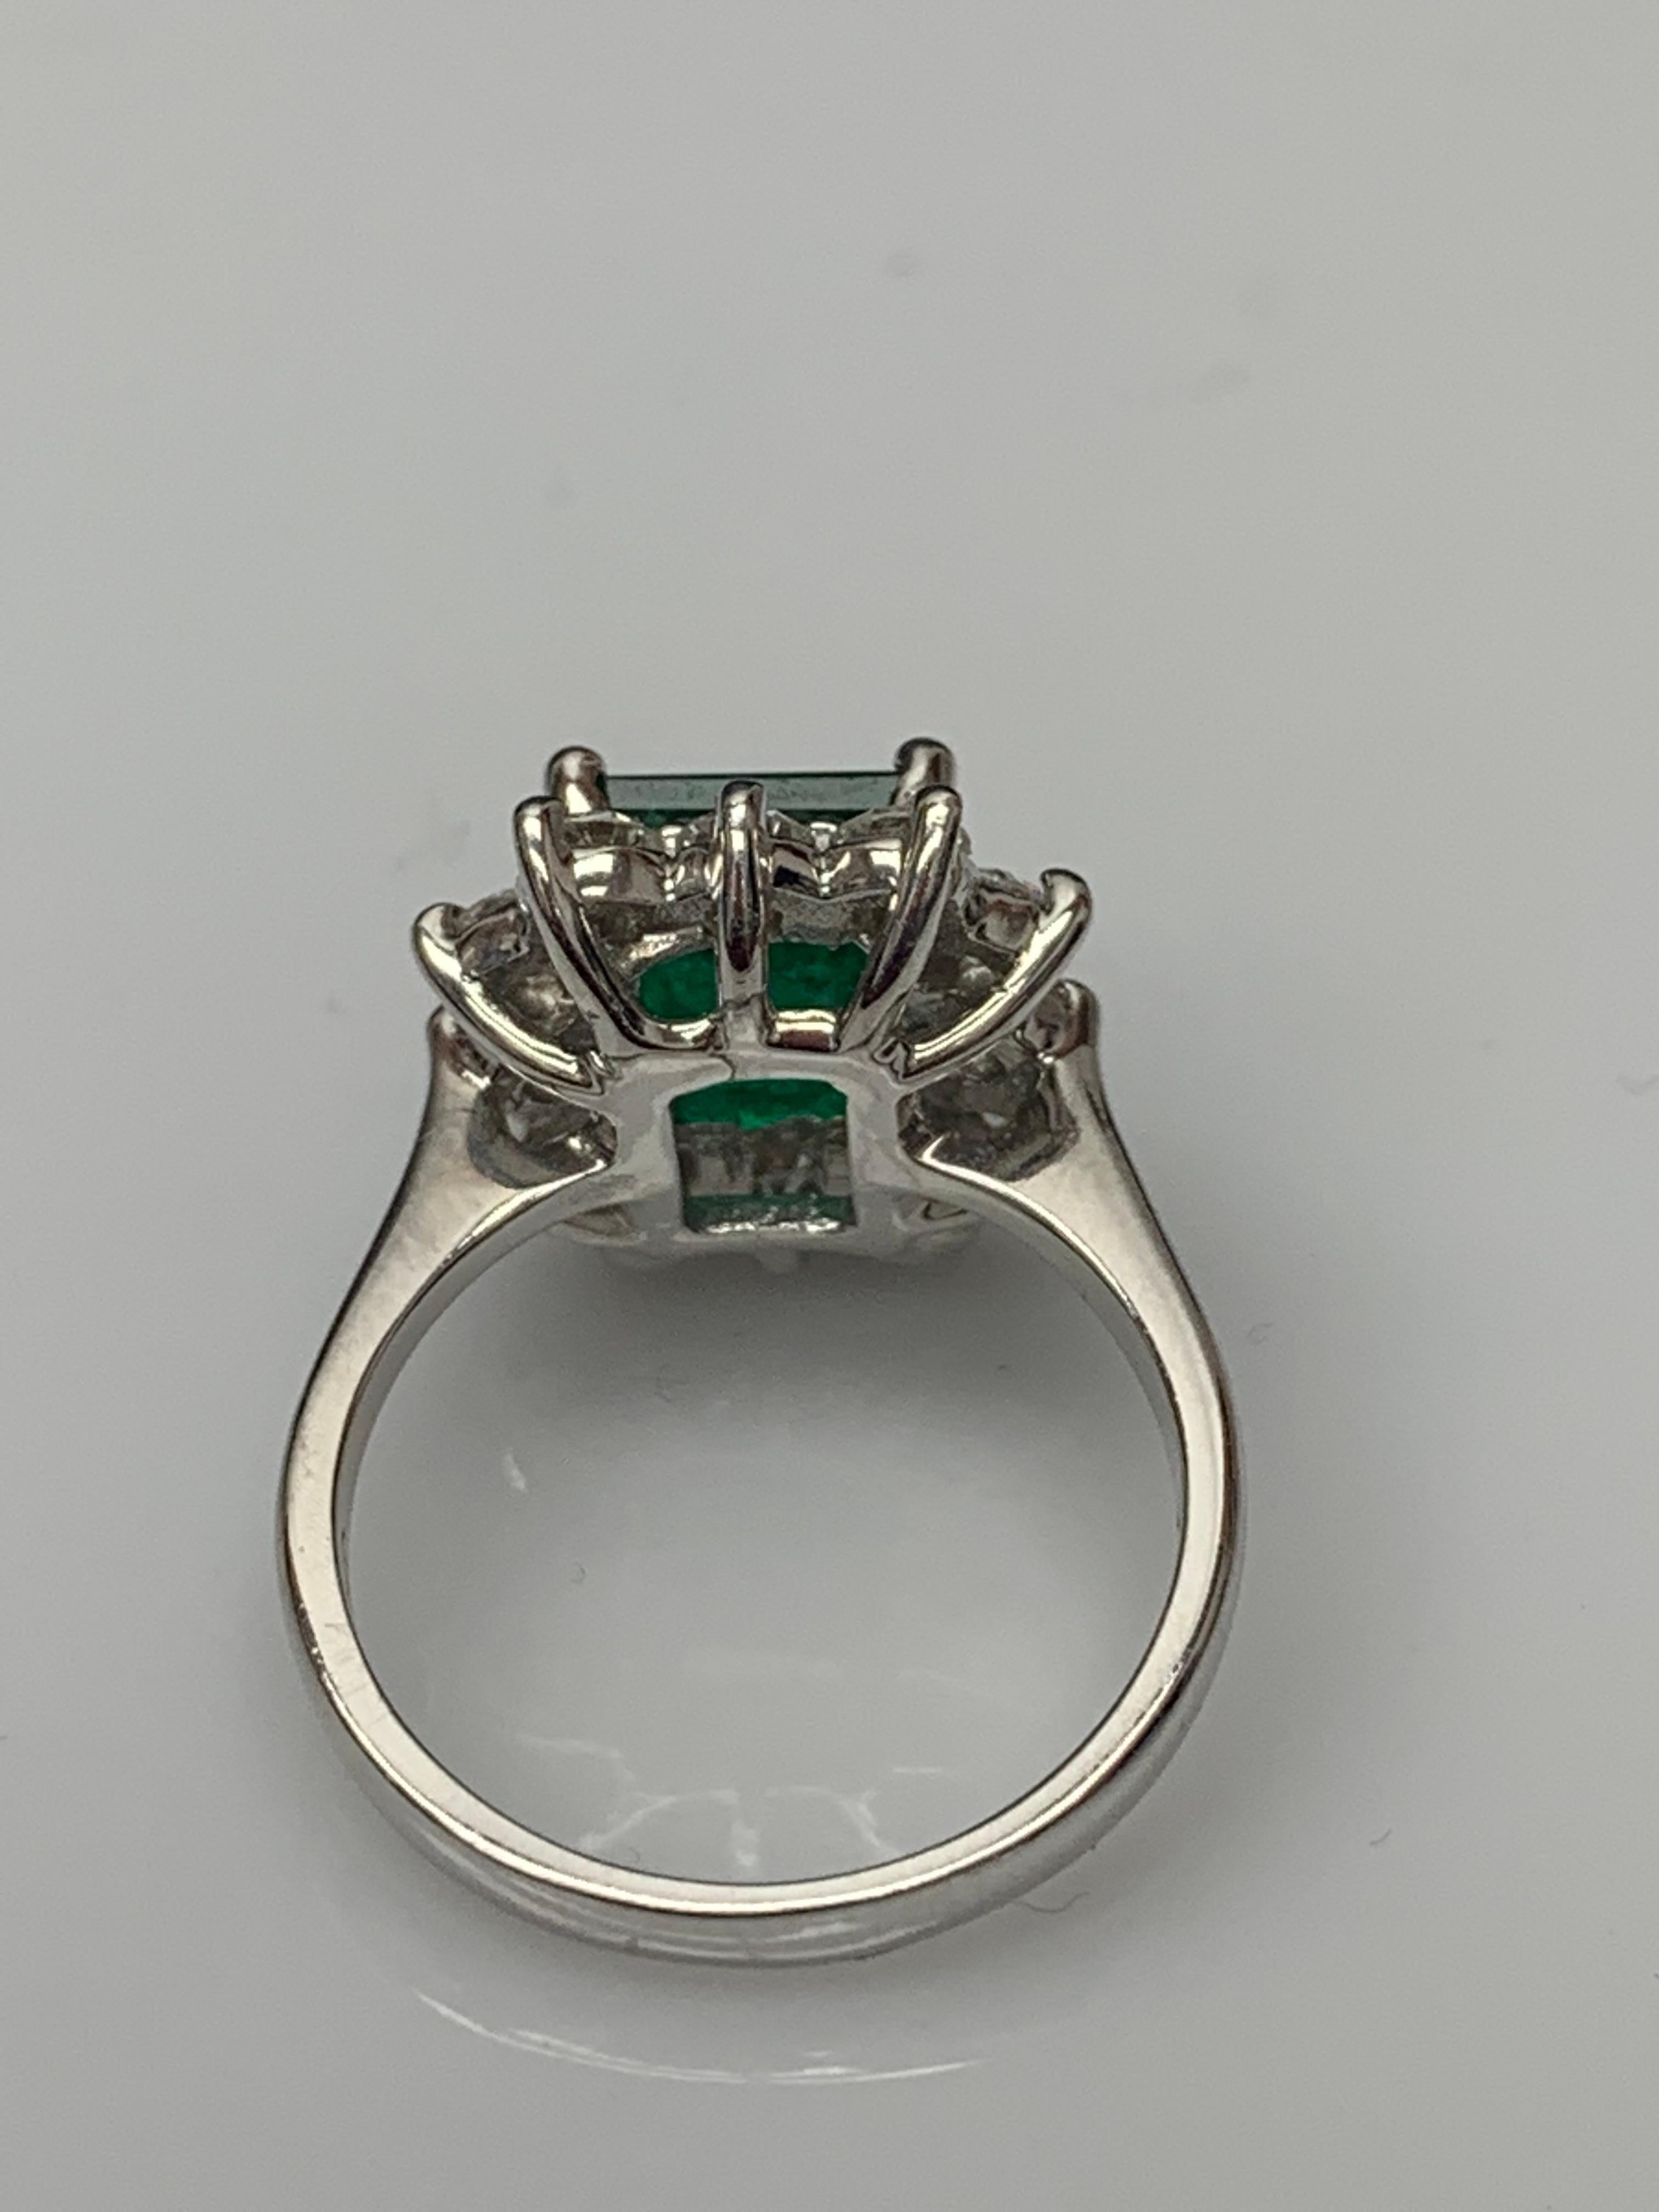 Certified 3.17 Carat Emerald Cut Emerald Diamond Ring in 14K White Gold In New Condition For Sale In NEW YORK, NY